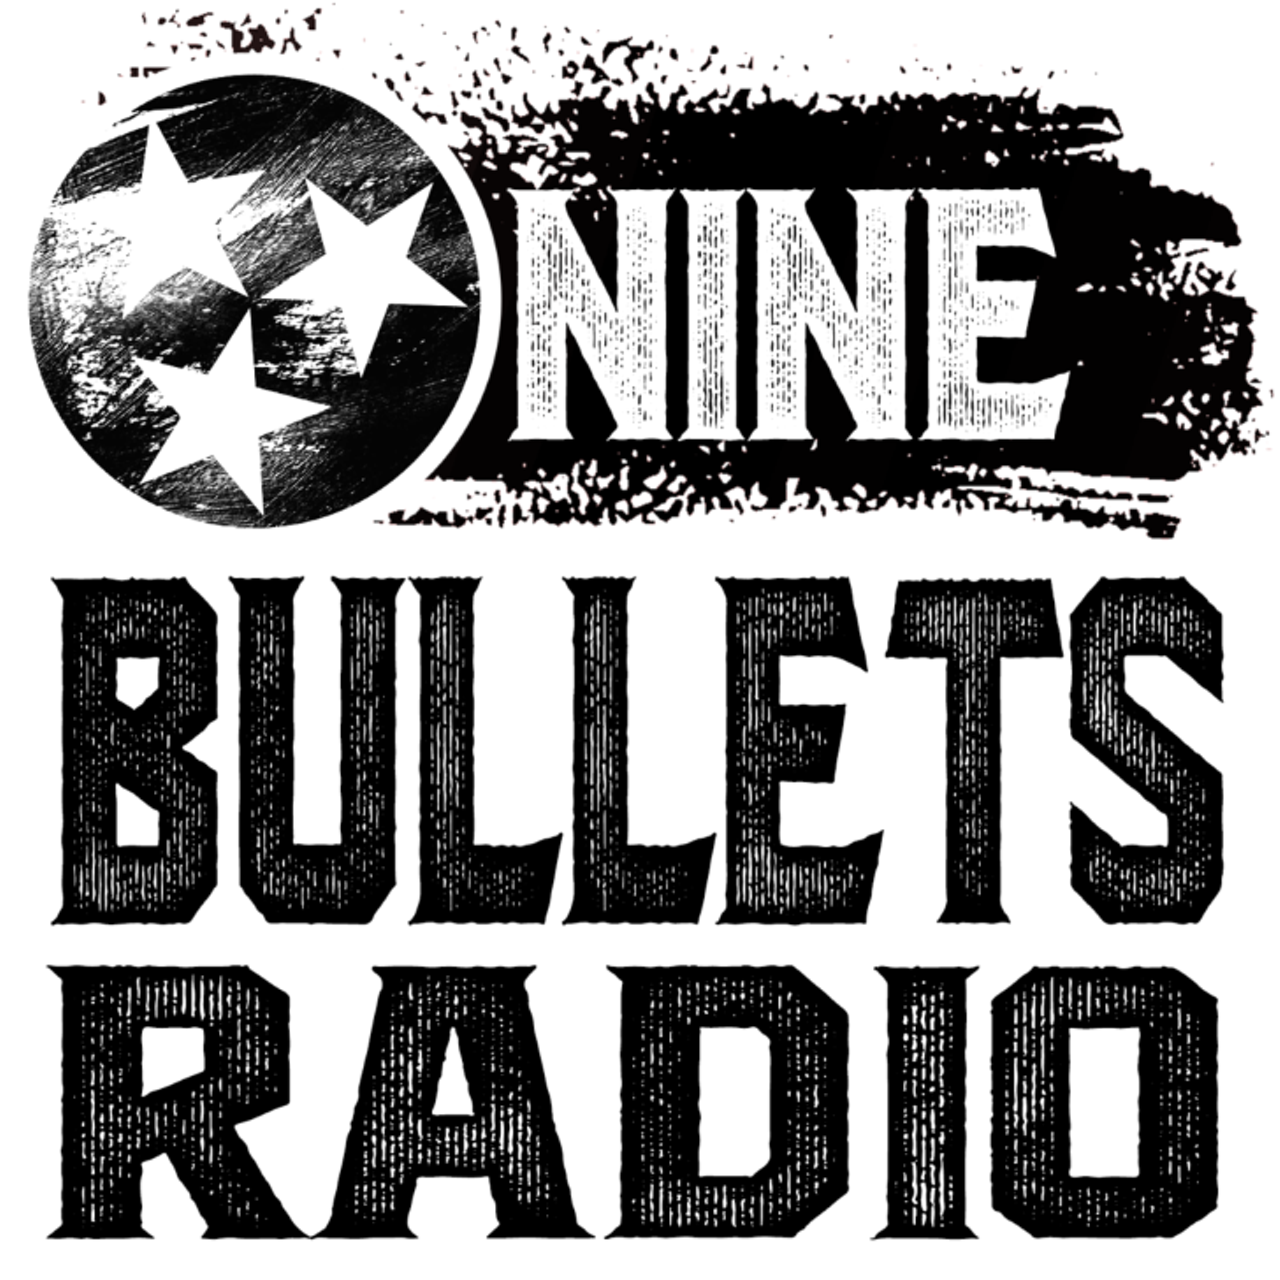 Nine Bullets Radio
9B used to be a kickass Americana radio program on community radio station WMNF Tampa 88.5-FM, but then its host moved to Nashville. Now it&#146;s a Music City podcast still wholly dedicated to breaking the genre&#146;s best new artists (Becky Warren and John Moreland are some my personal favorites, which I found on 9B). Host Bryan Childs still roots for the Lightning, too, so we&#146;re lumping him into the local pile. 9bradio.net 
Photo via Nine Bullets Radio&#146;s website